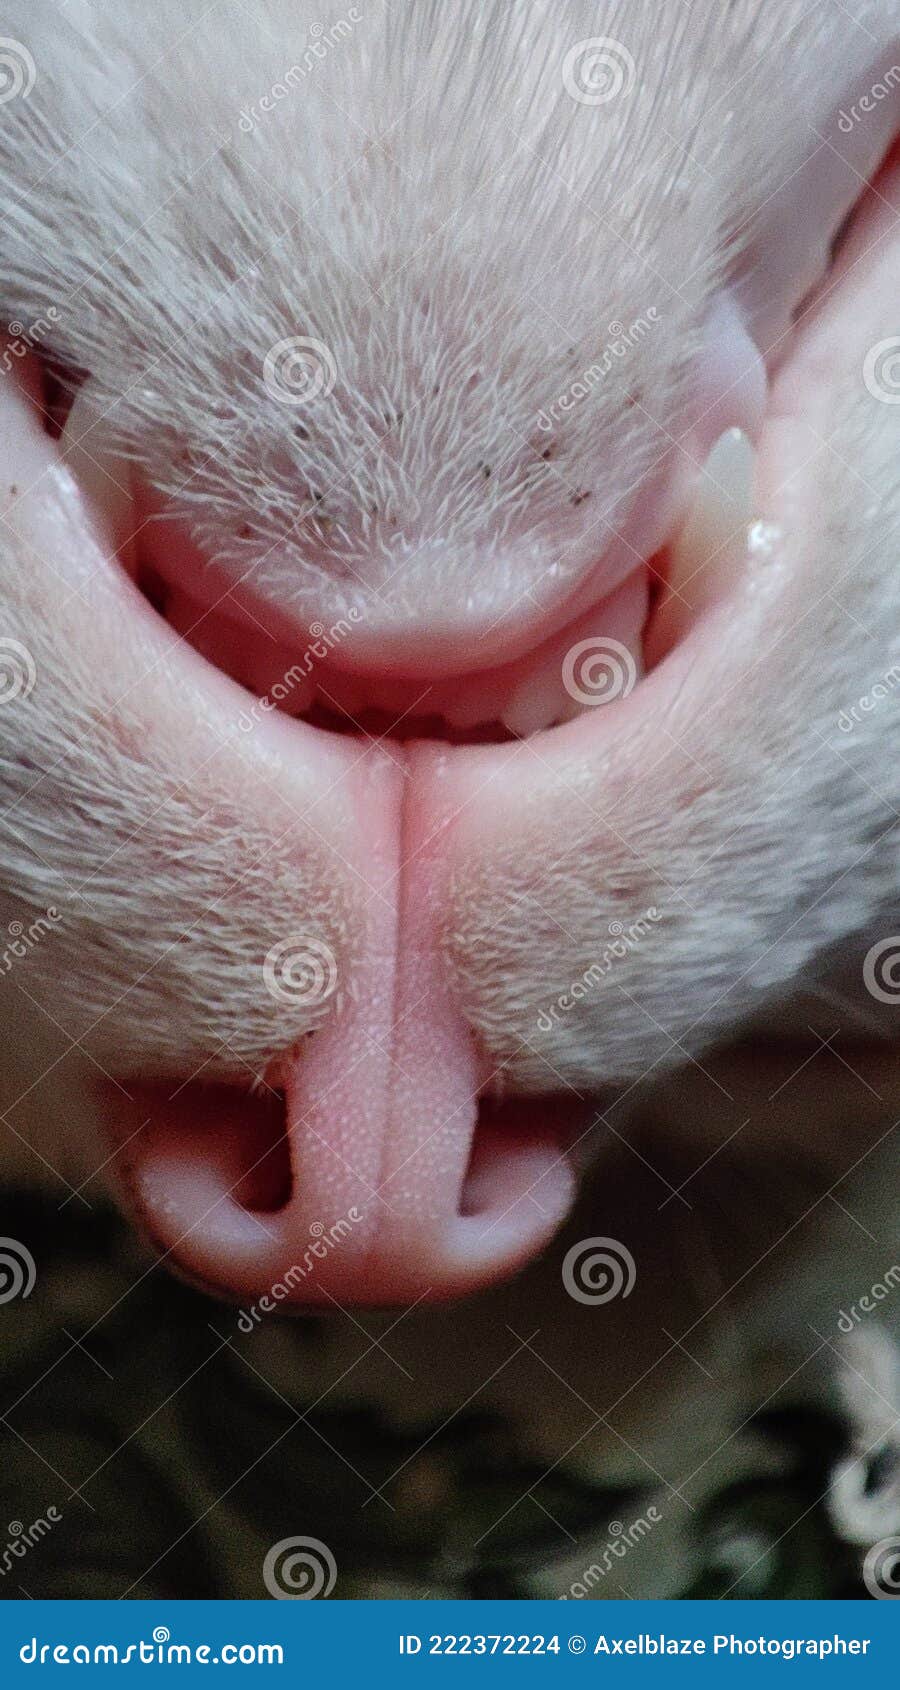 yammy cat mouth with white glazing teeth